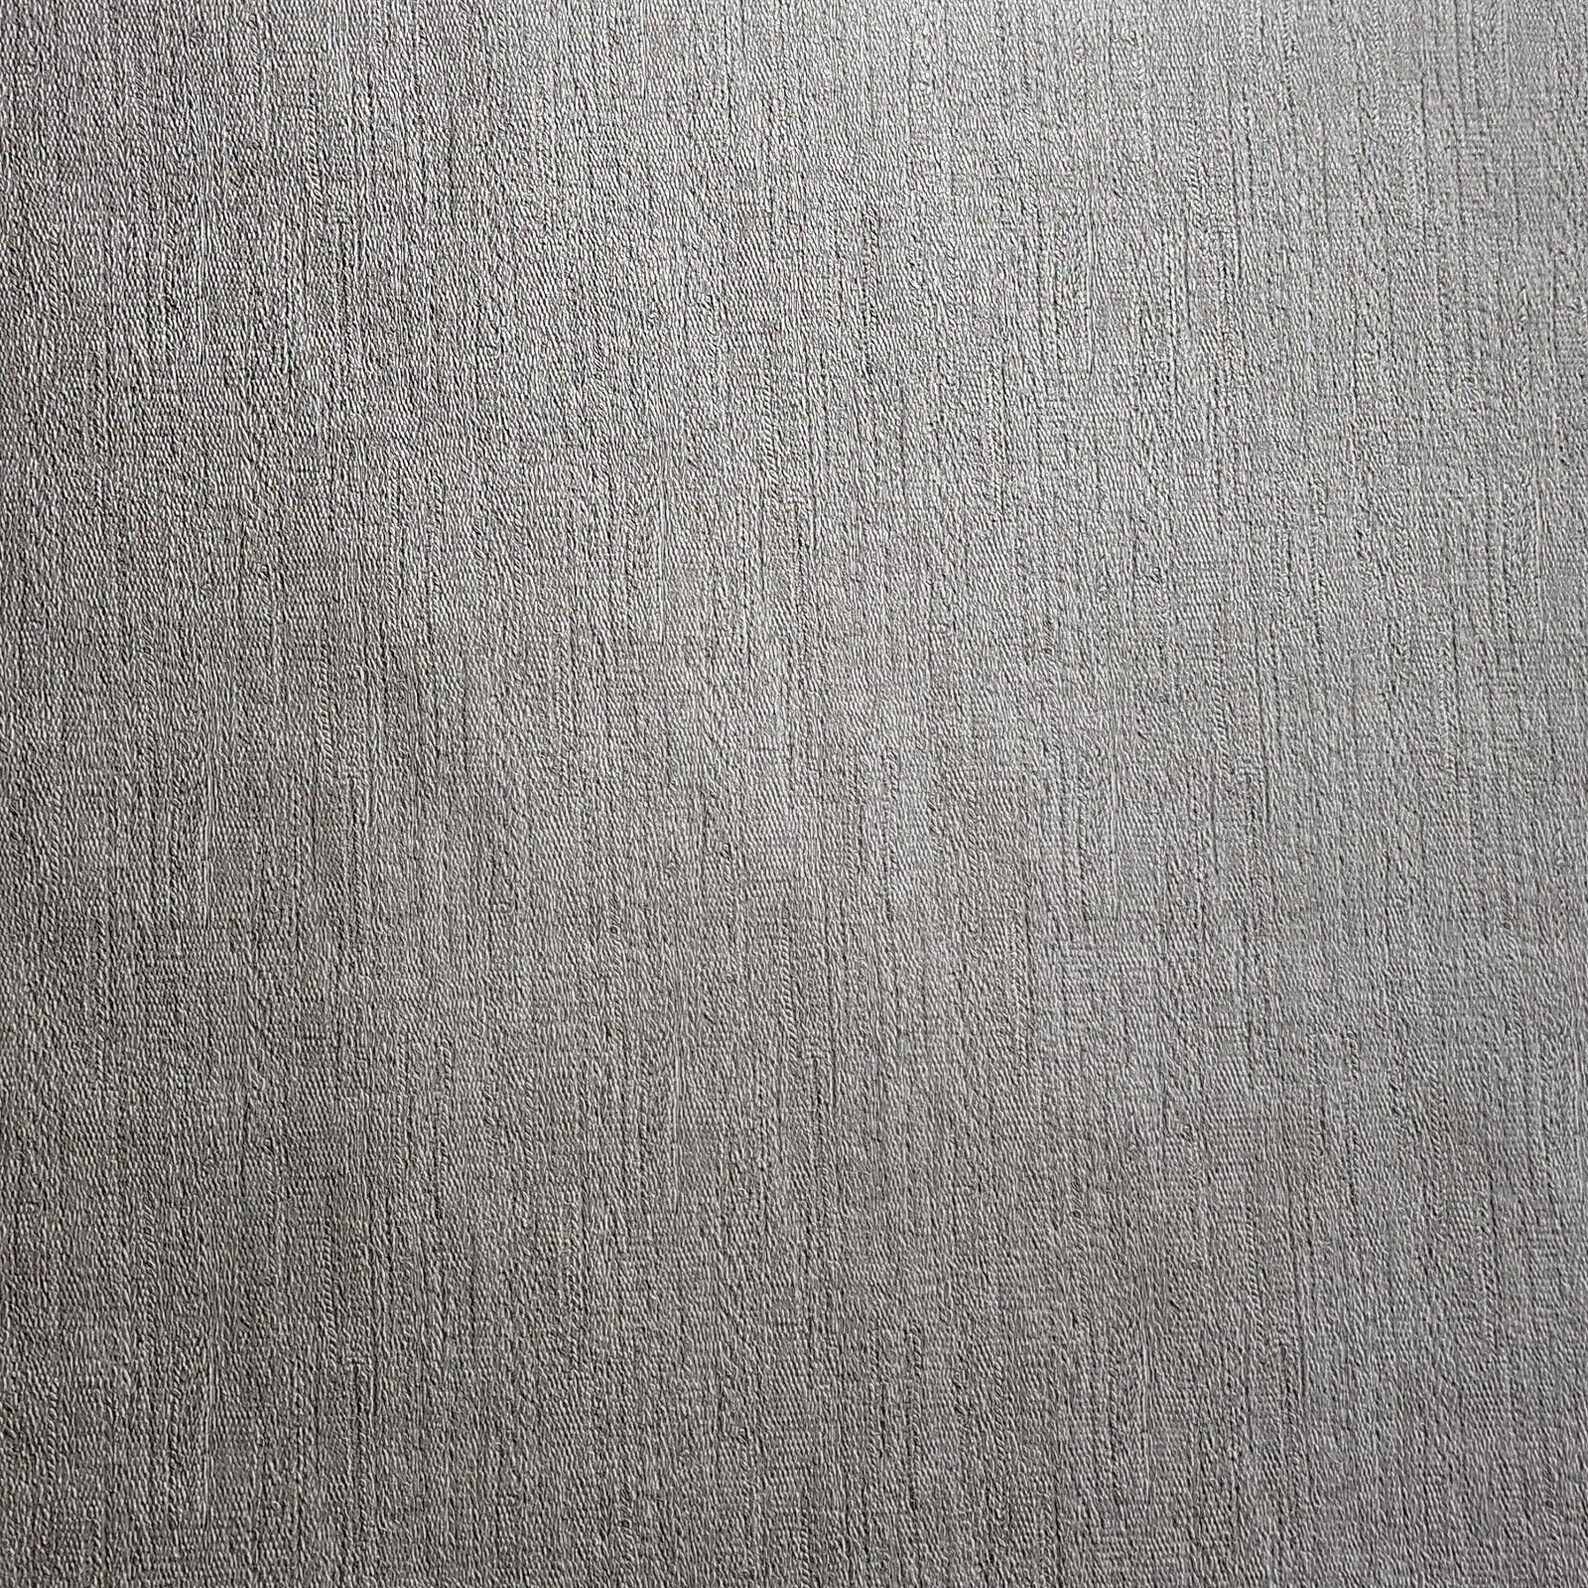 Modern Lines Gray Taupe Tan Cream Faux Knit Fabric Textured - Etsy